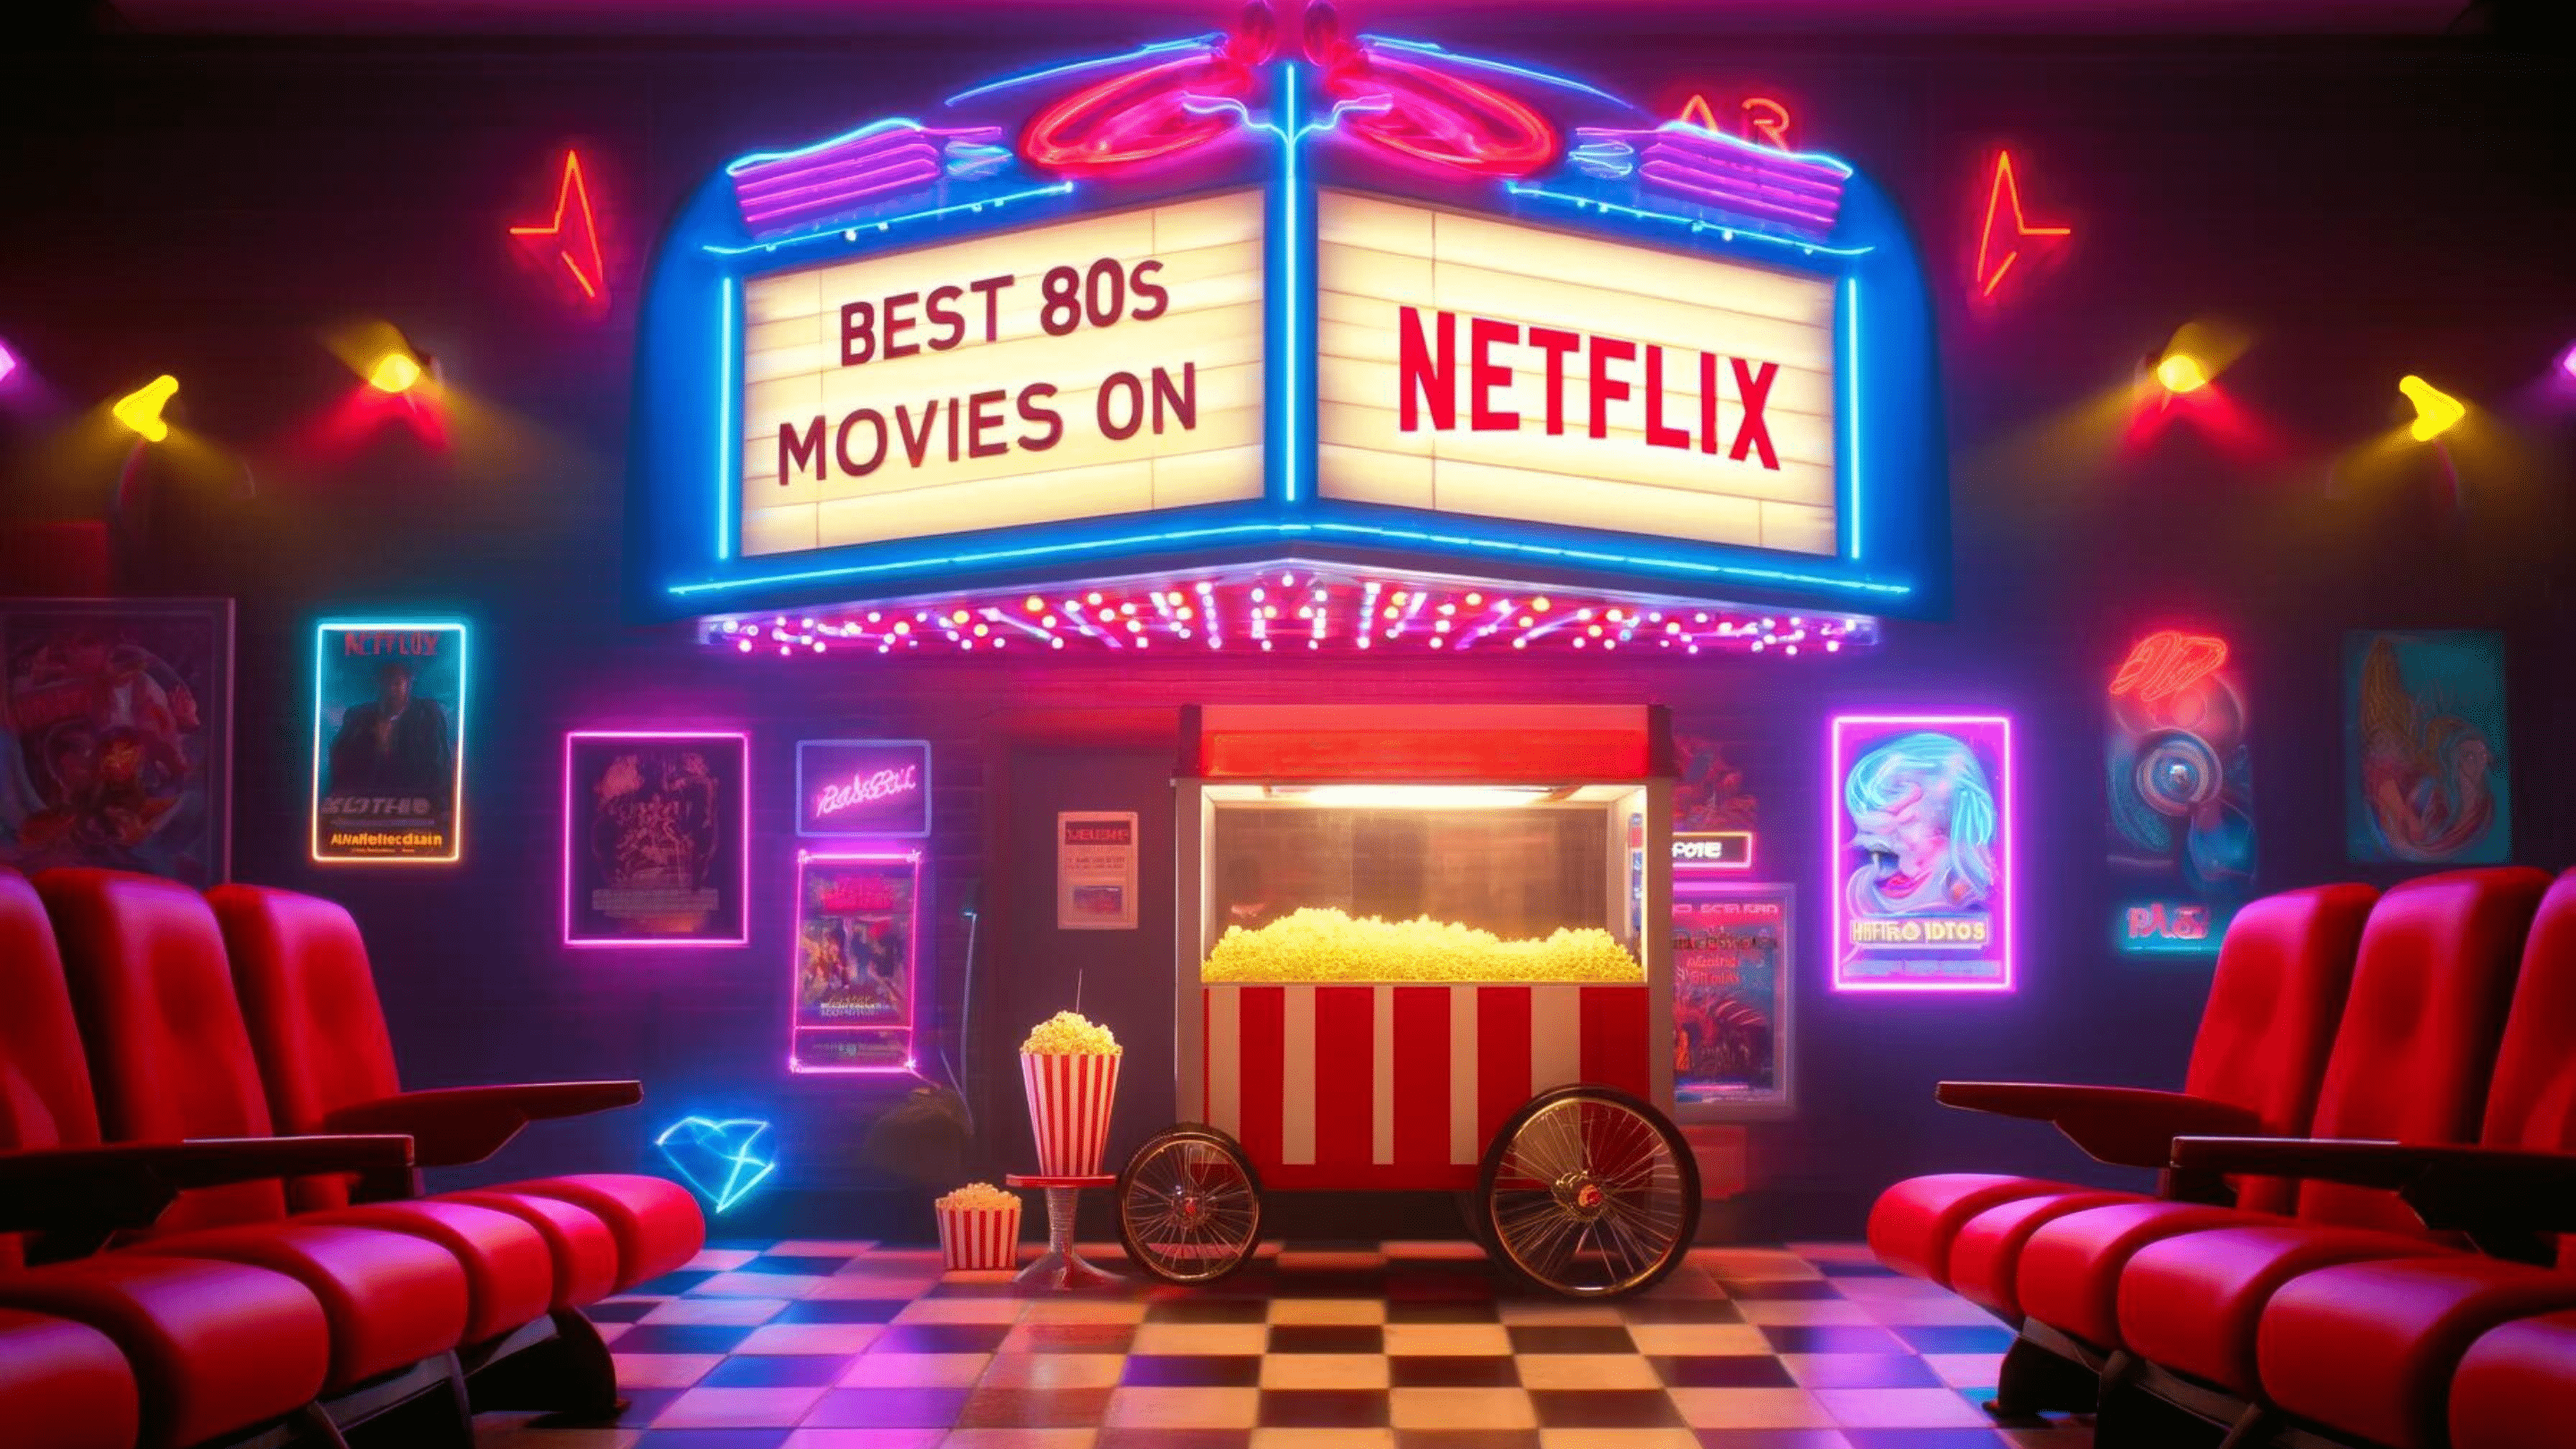 Best 80s Movies on Netflix Now